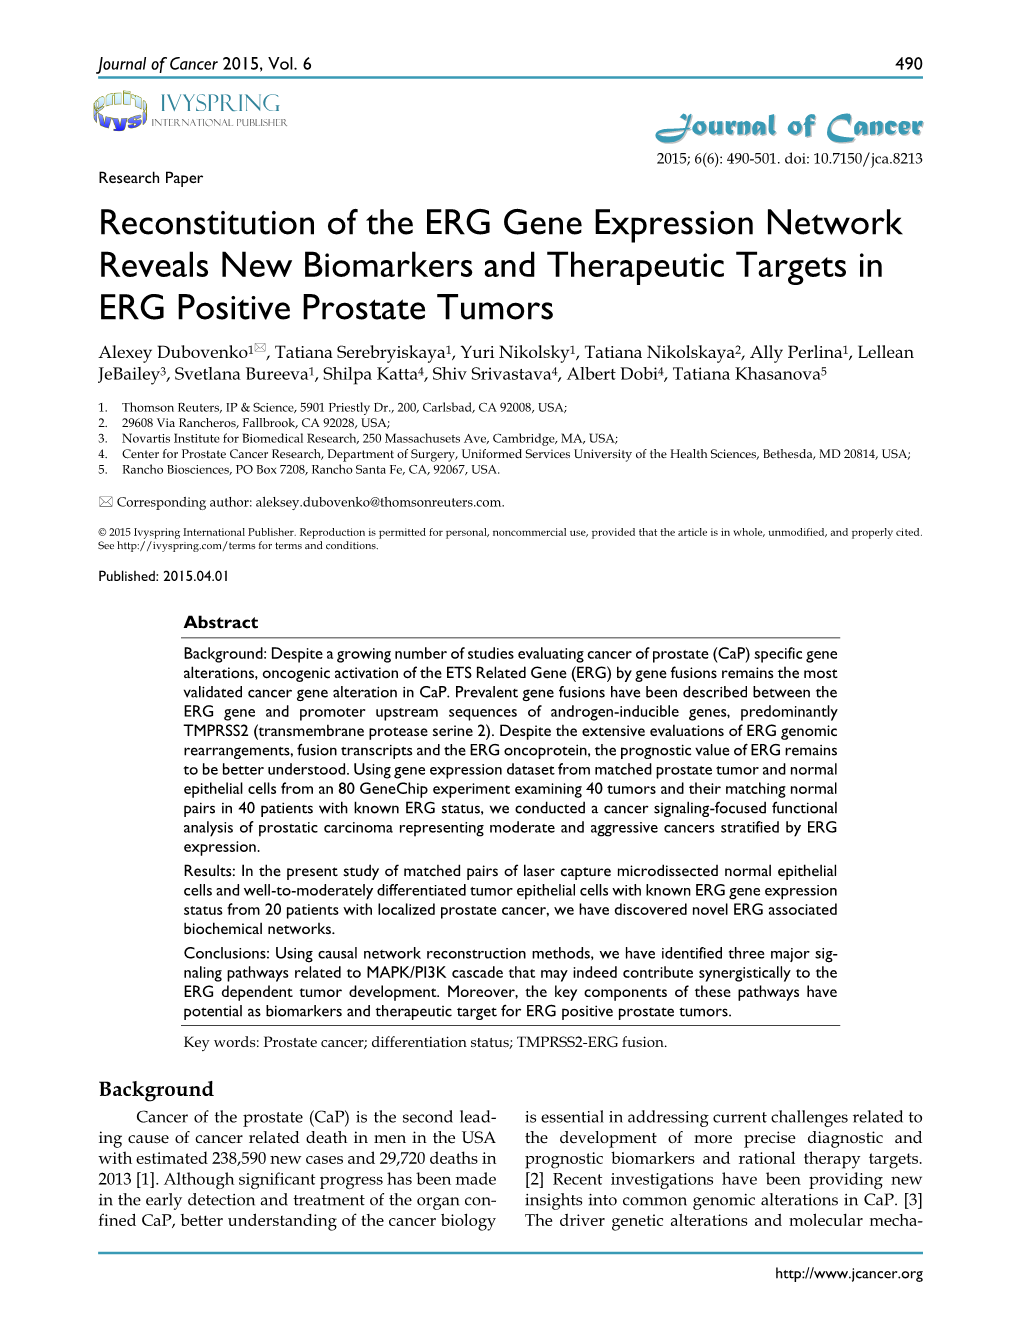 Reconstitution of the ERG Gene Expression Network Reveals New Biomarkers and Therapeutic Targets in ERG Positive Prostate Tumors